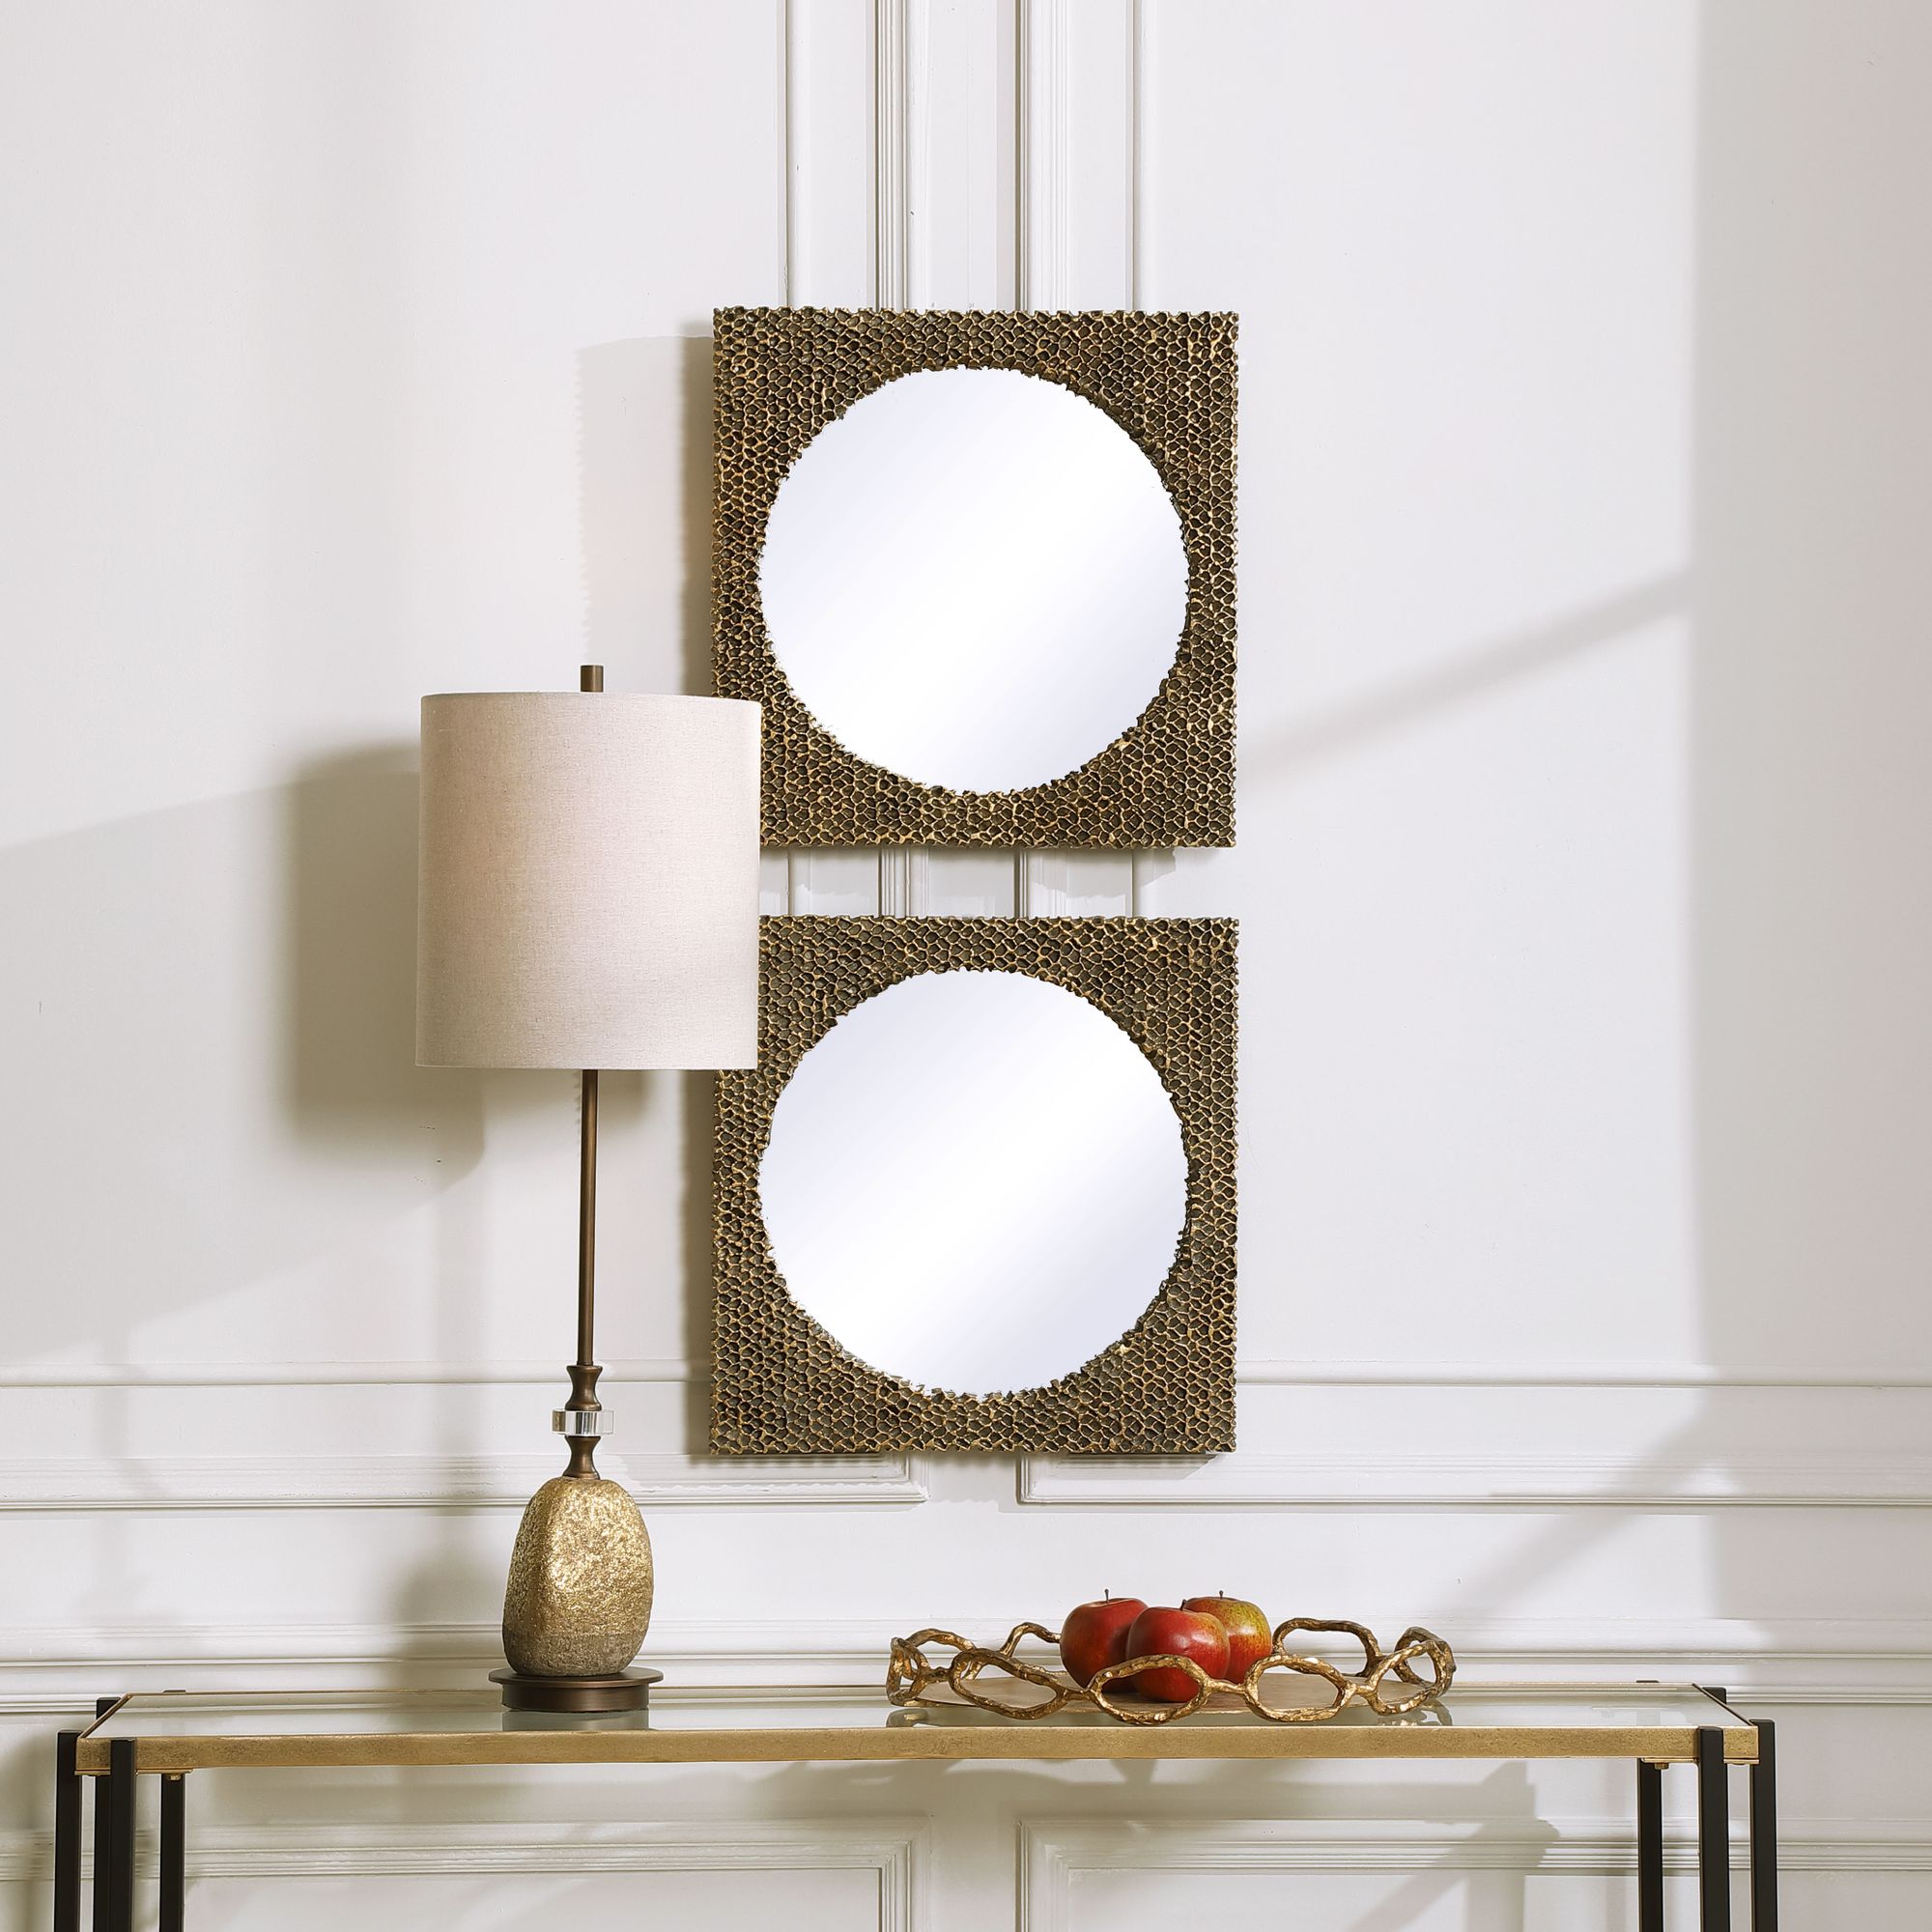 The Hive Square Mirrors - Set of 2 at